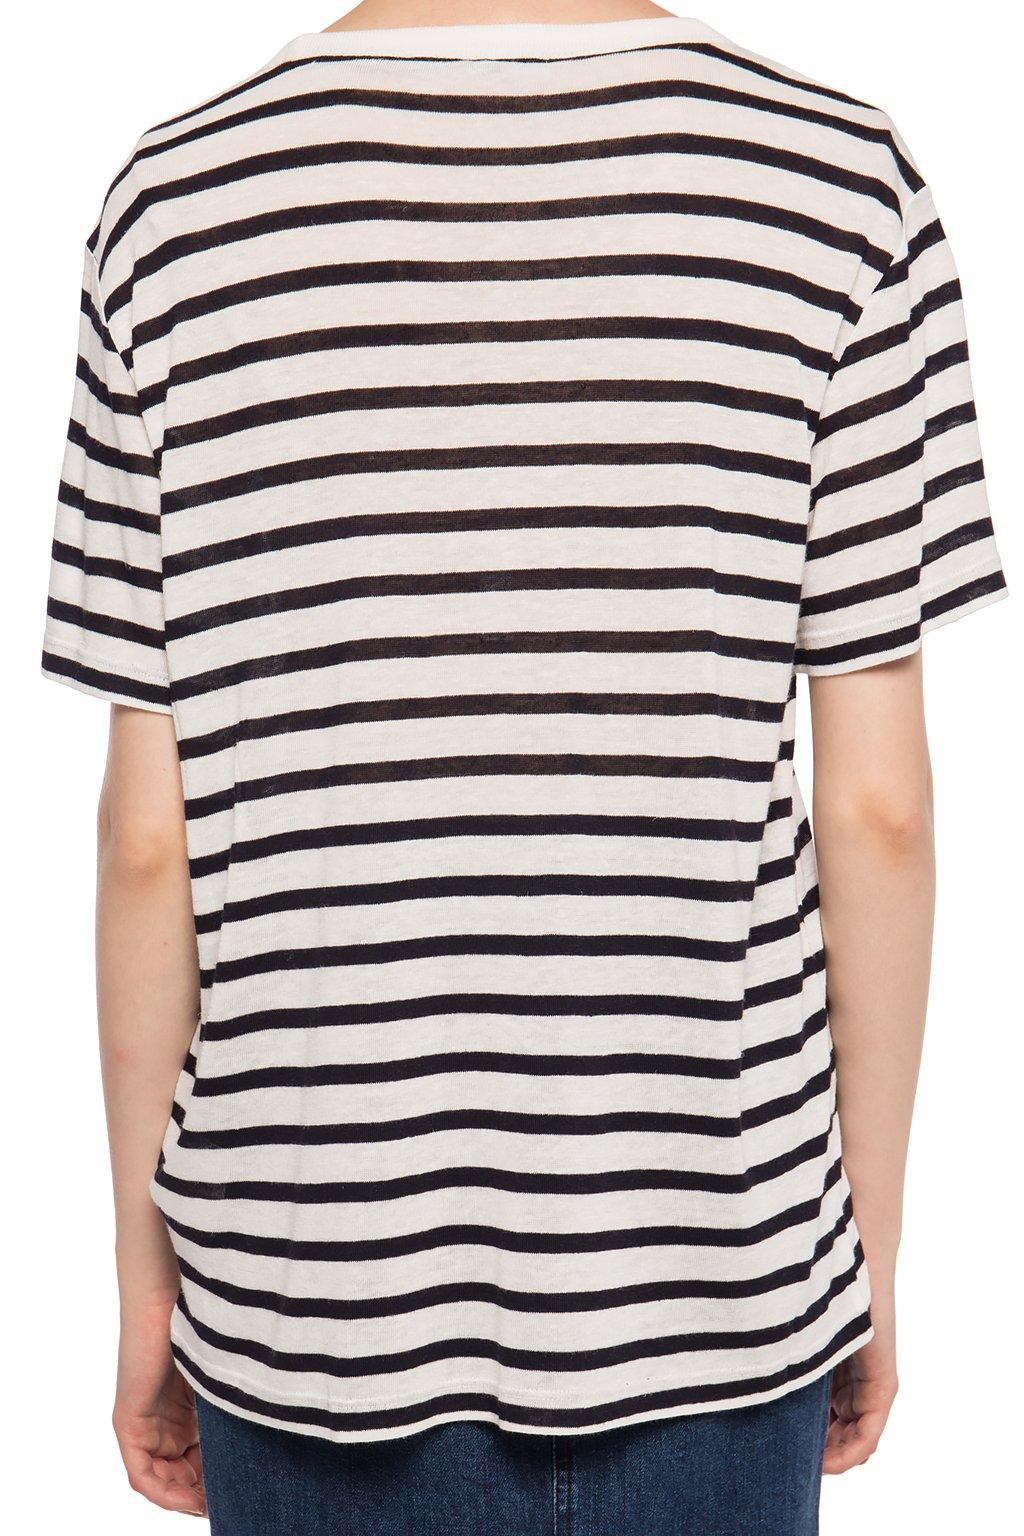 T By Alexander Wang Synthetic Striped T-shirt in White - Lyst